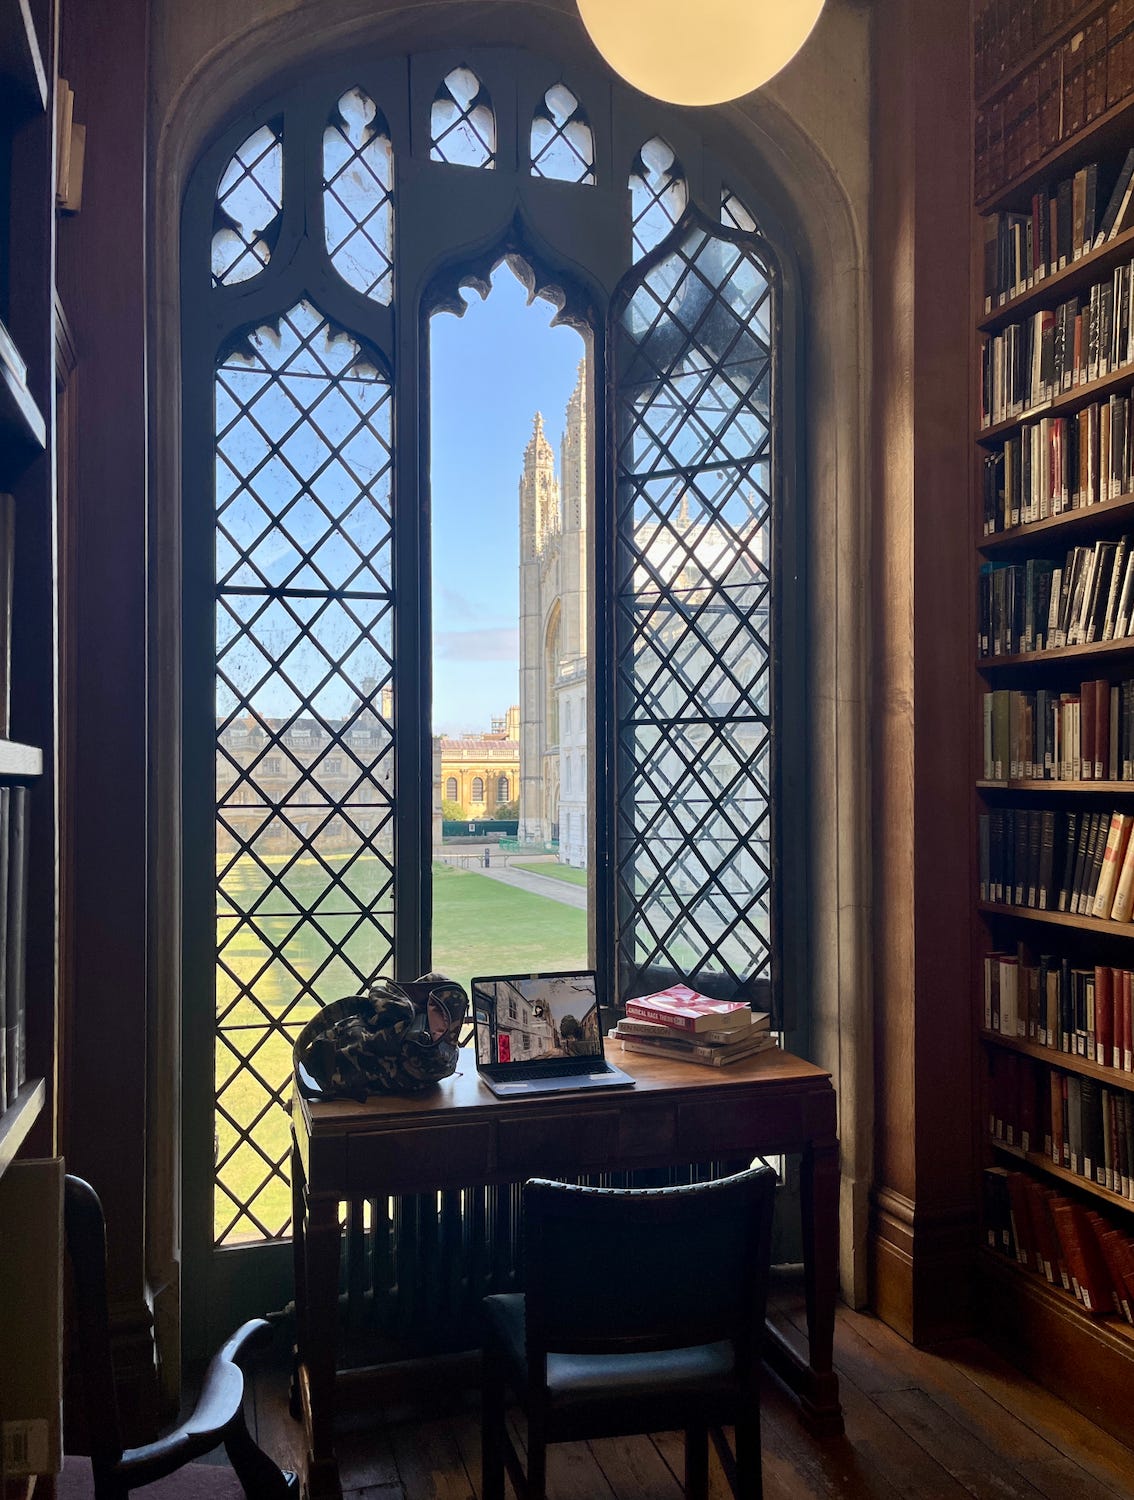 This is my office when I work from the library at King’s College, Cambridge. It’s so quiet now but next week, when the students return, the peace will be shattered.